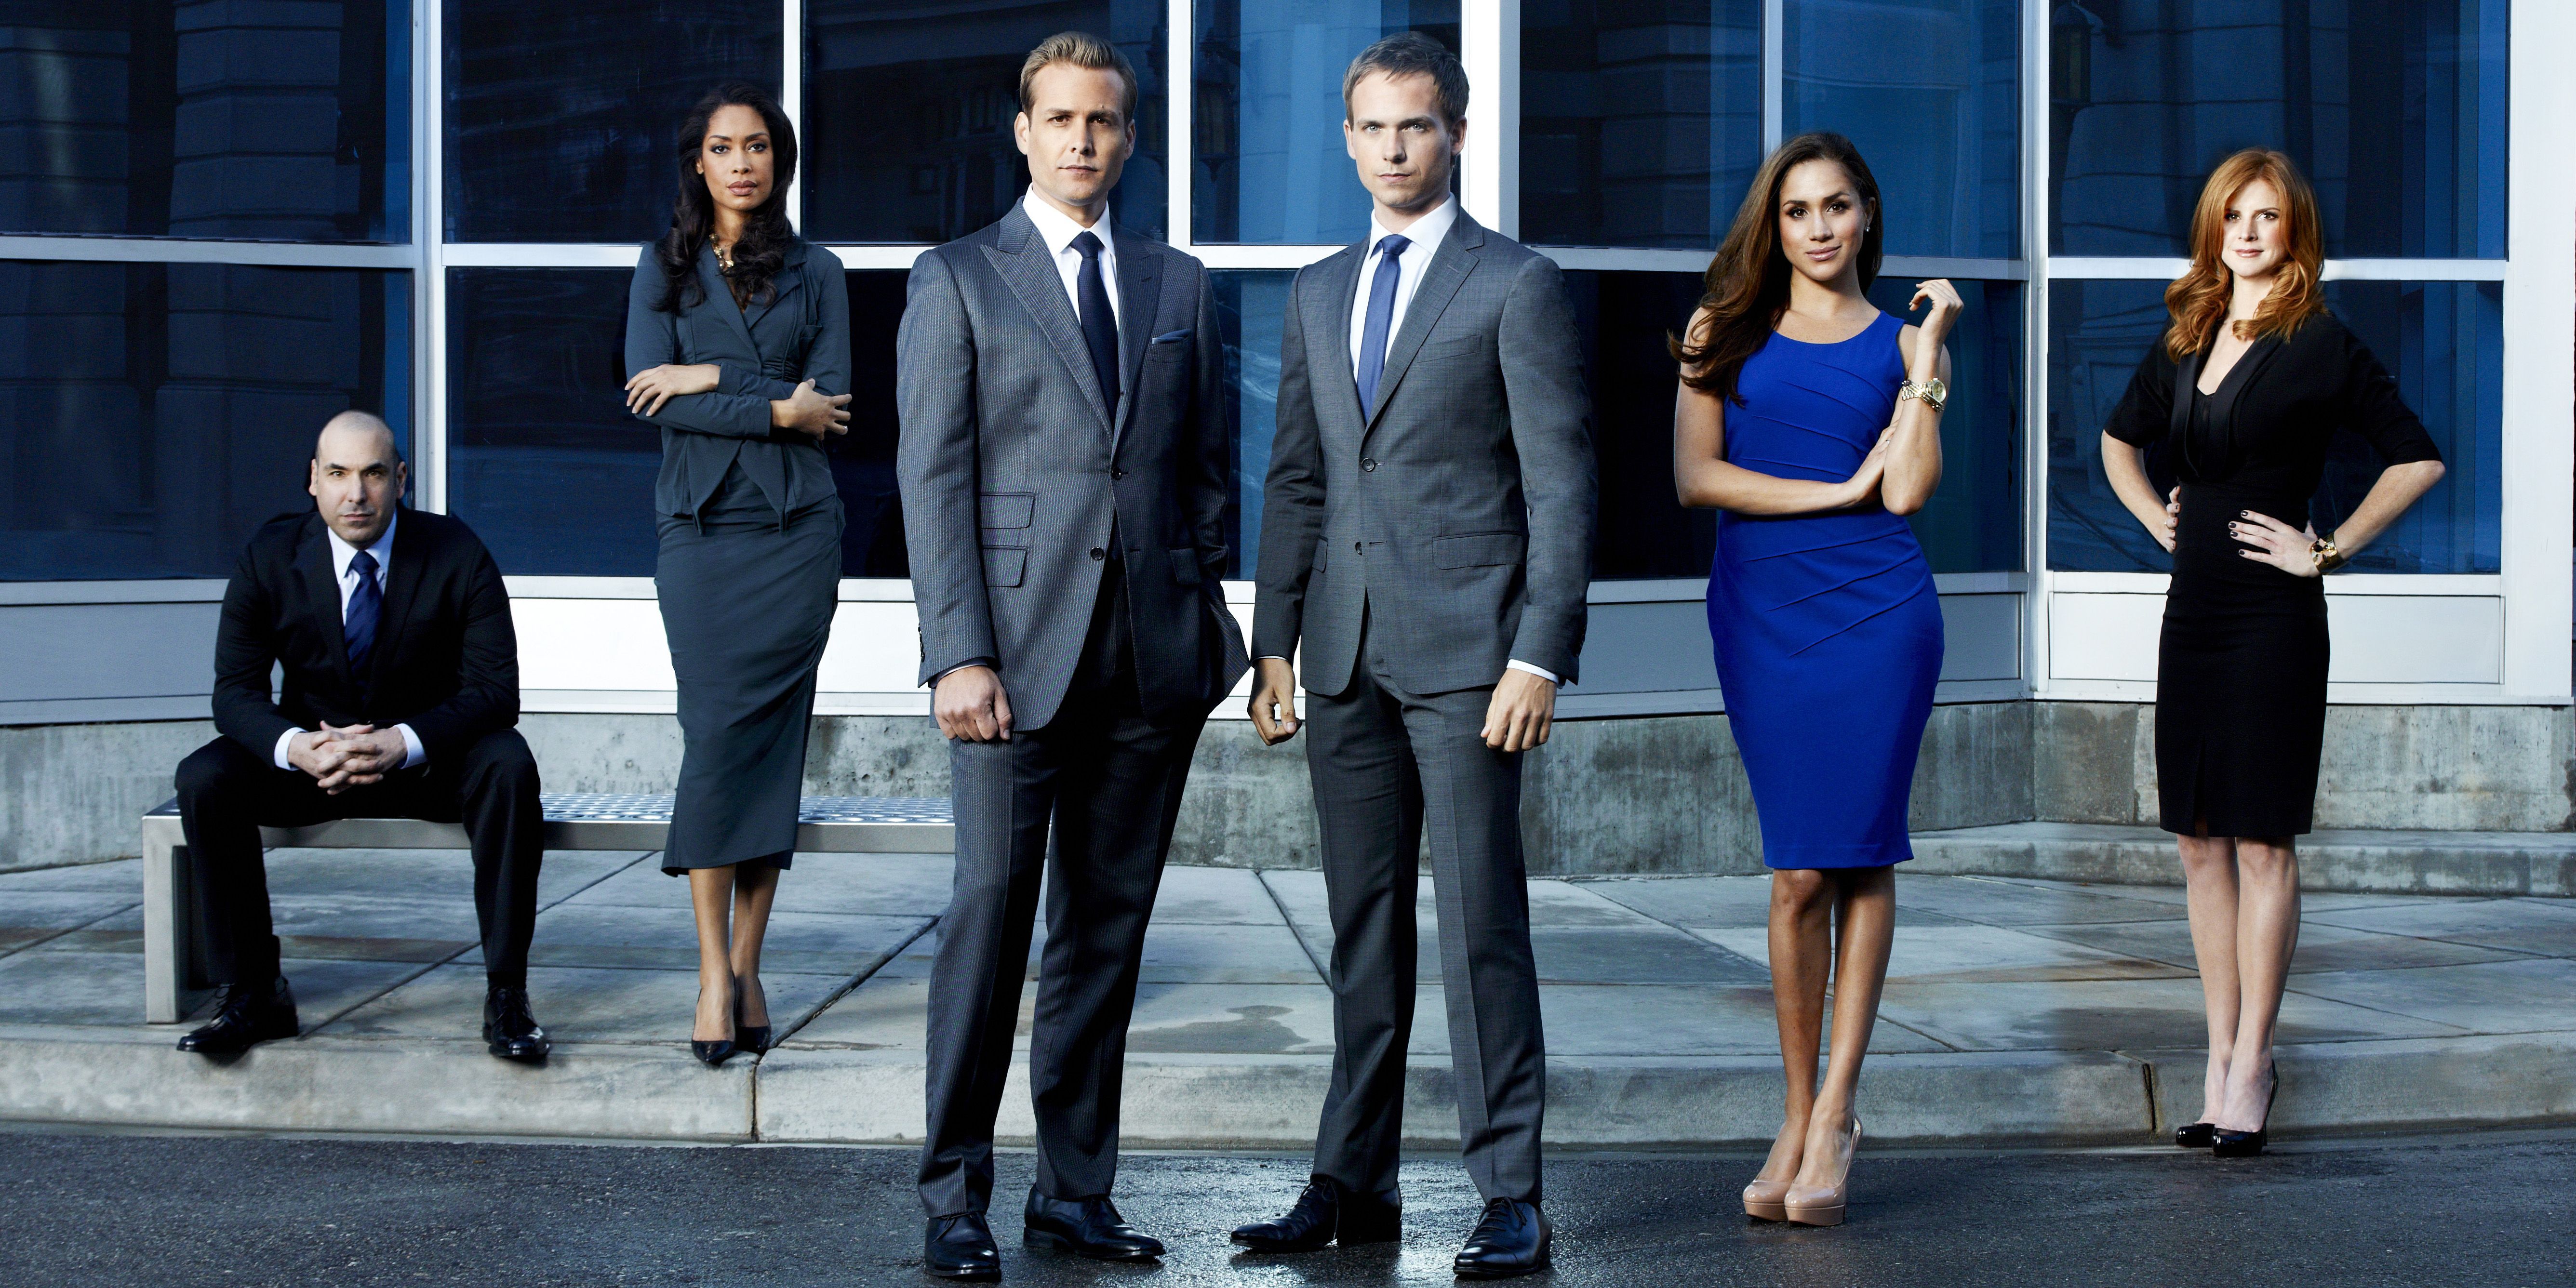 Suits': Why It's Impossible Not to Like This Netflix Phenomenon